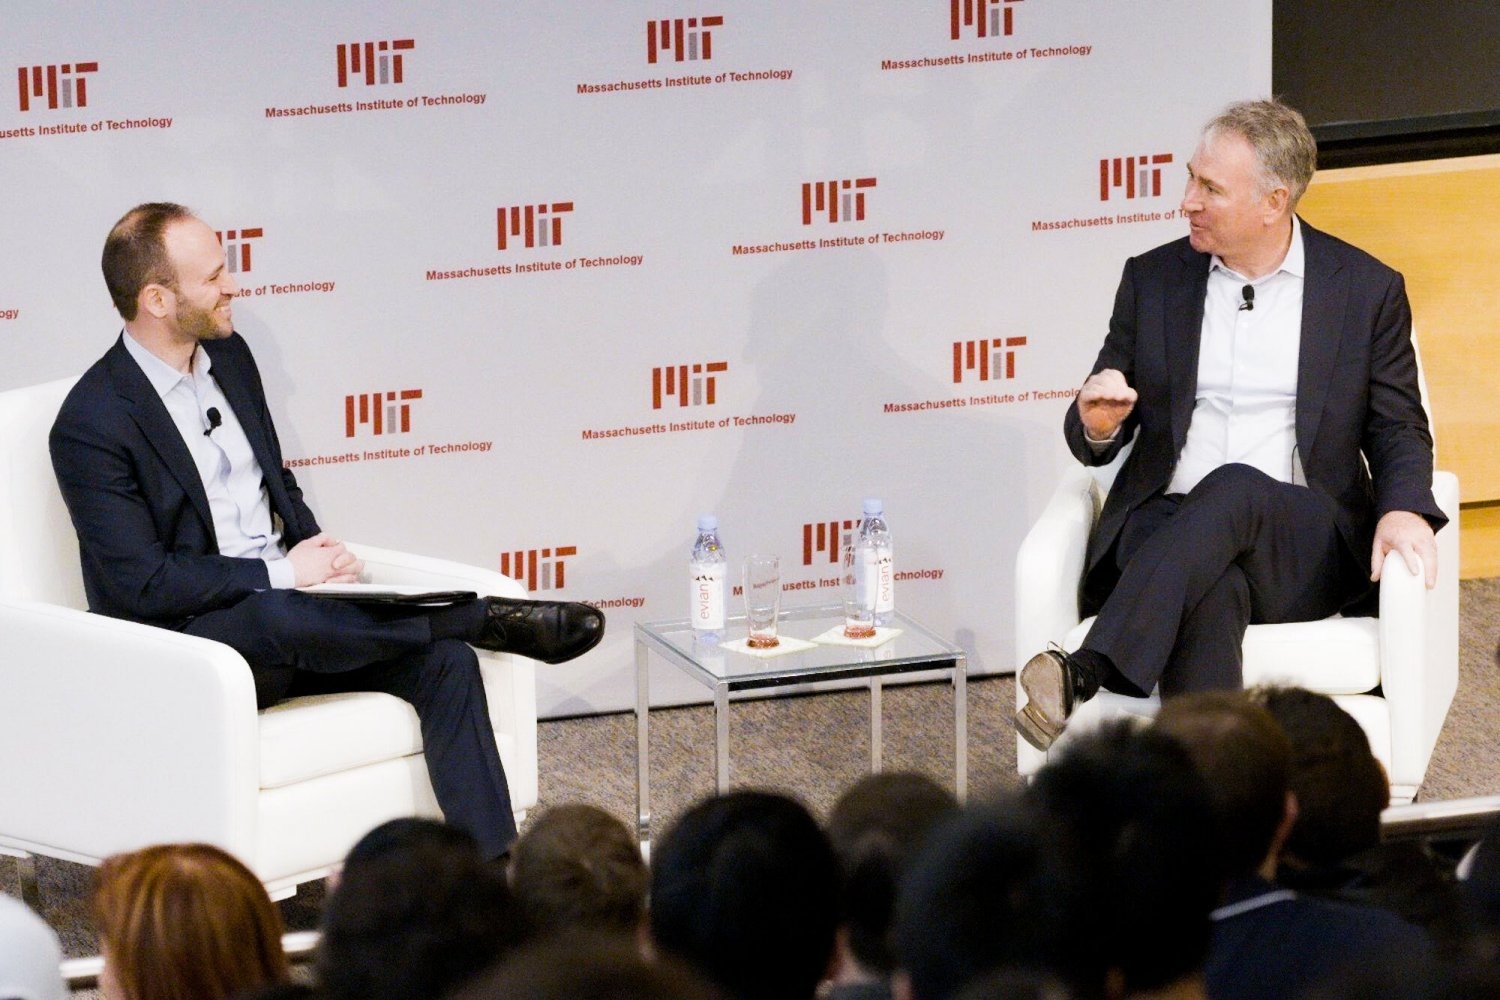 Bryan Landman ’11 (left) and Ken Griffin discussed how technology will continue to transform trading and investing, during an event at the Wong Auditorium.  